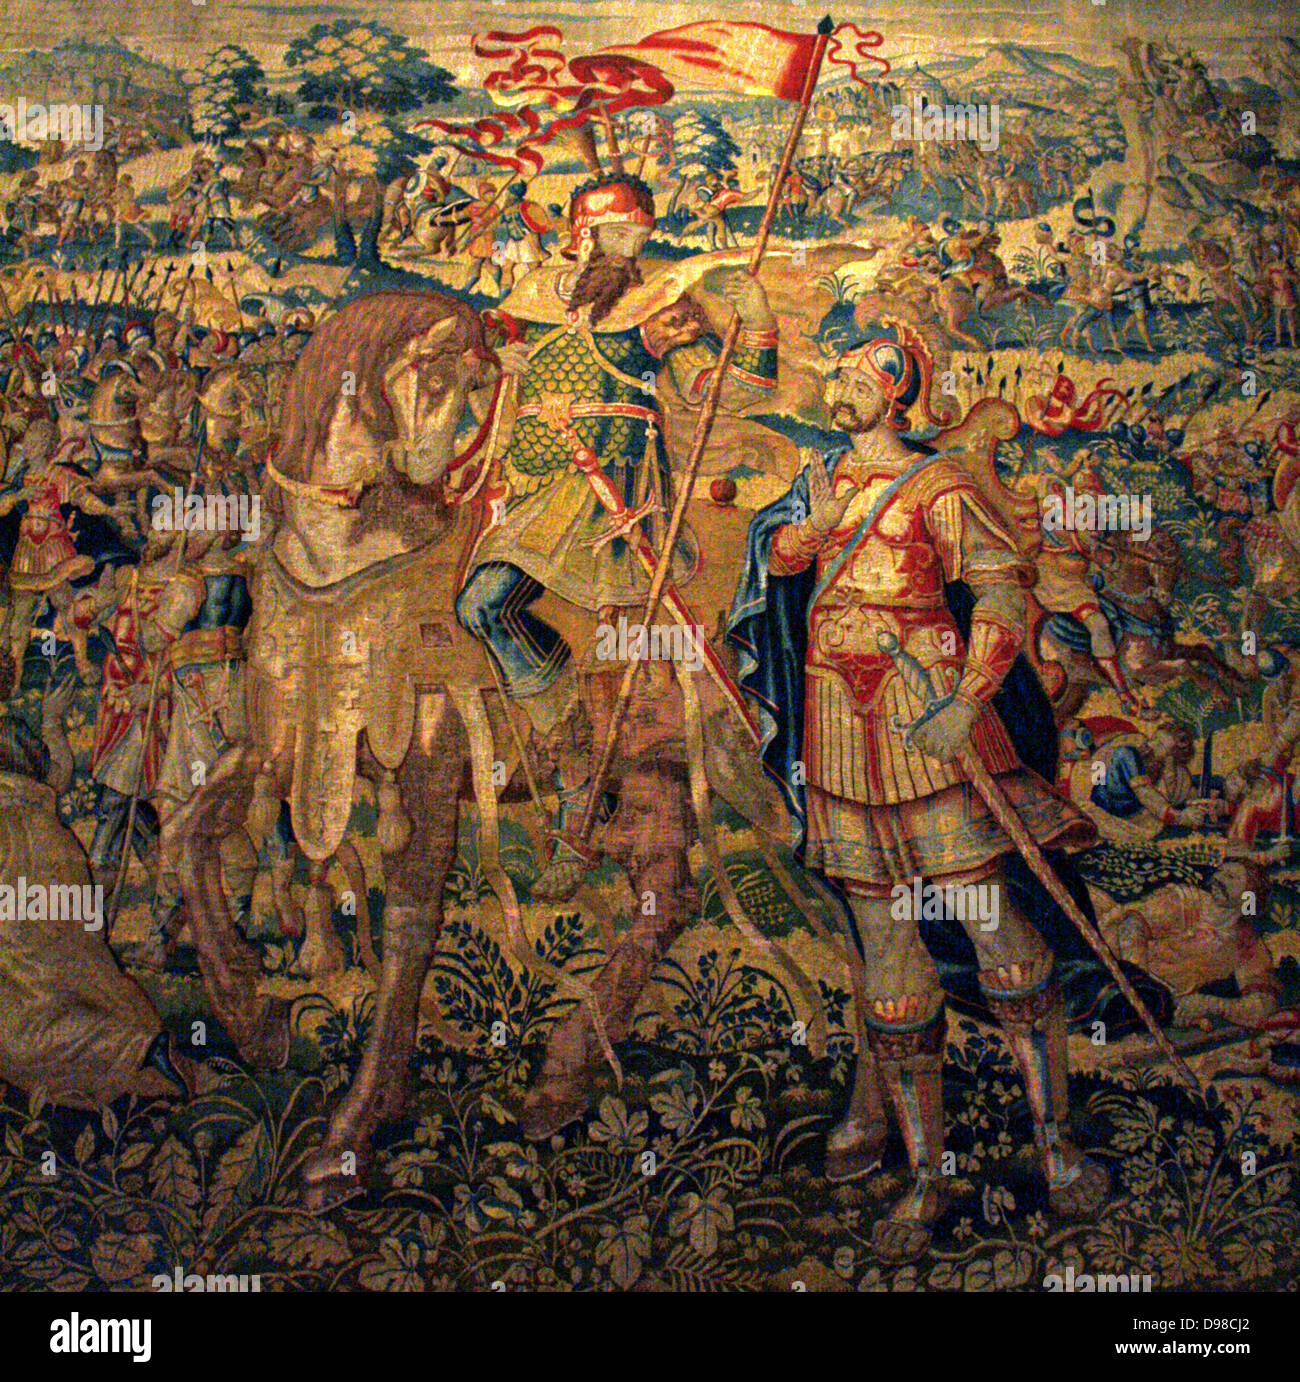 Godefroy de Bouillon.  Similar in design to the King David tapestry, this shows the crusader Godefroy de Bouillon as a victorious soldier.  Godefroy captured Jerusalem in 1099.  The heroic stories in both tapestries are depicted in a traditional manner, which adds to their magnificence. The naturalistic details in the borders are more up to date in style.  The weaver's monogram and the mark of the city of Brussels appear in the lower borders. Tapestry, between 1610-1631 Stock Photo